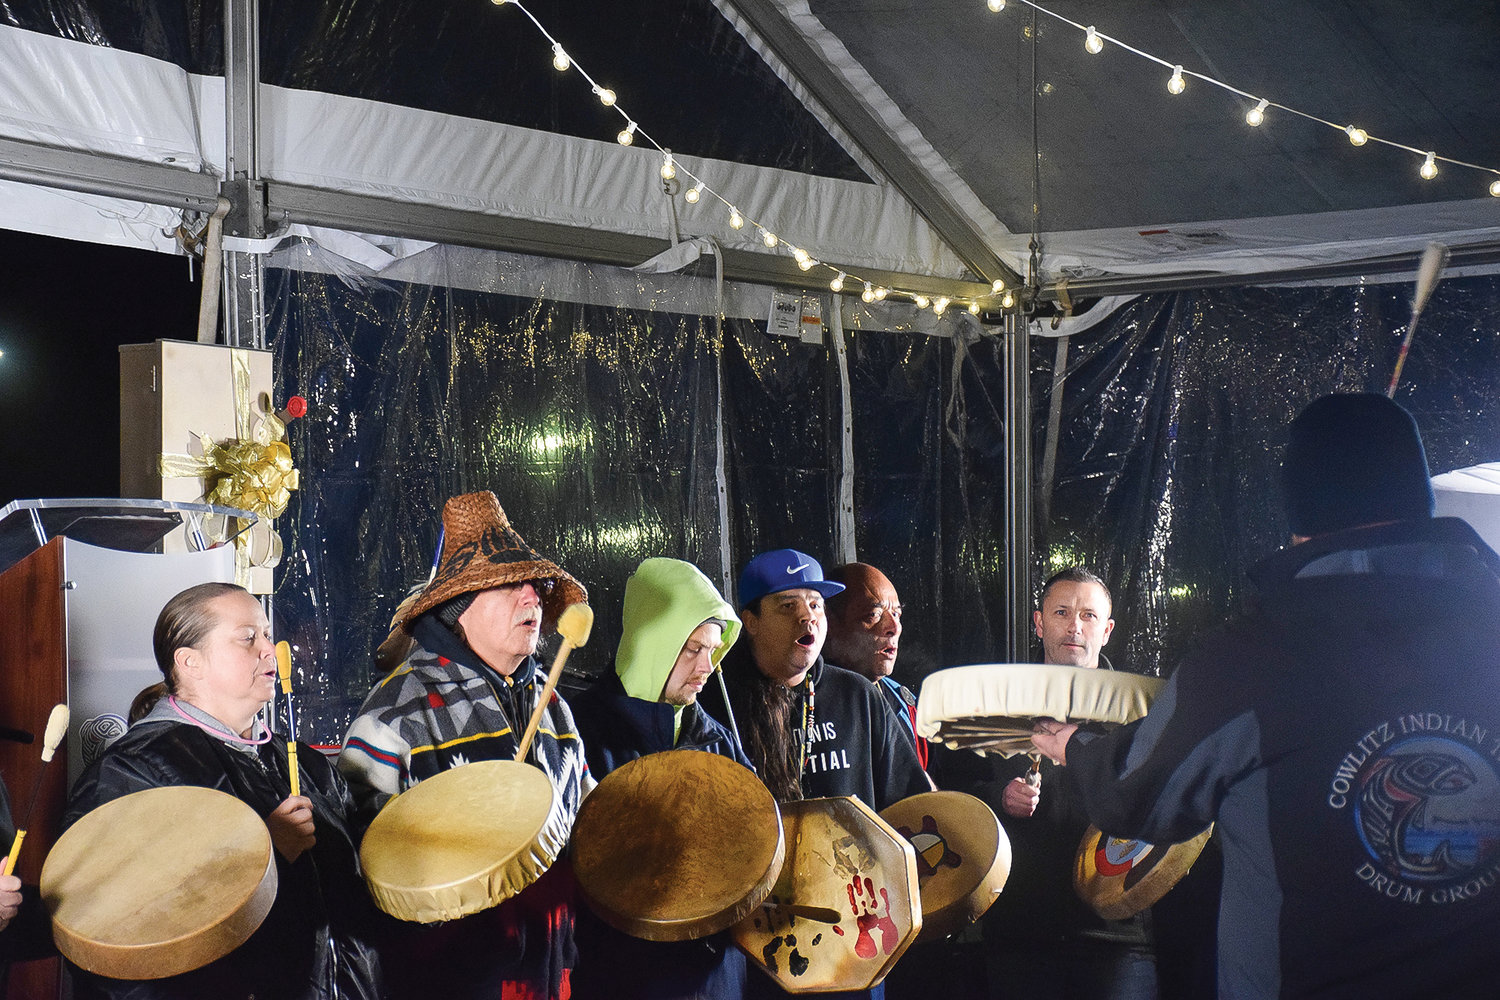 Cowlitz tribal drummers perform at ilani during a tree lighting event on Nov. 23.